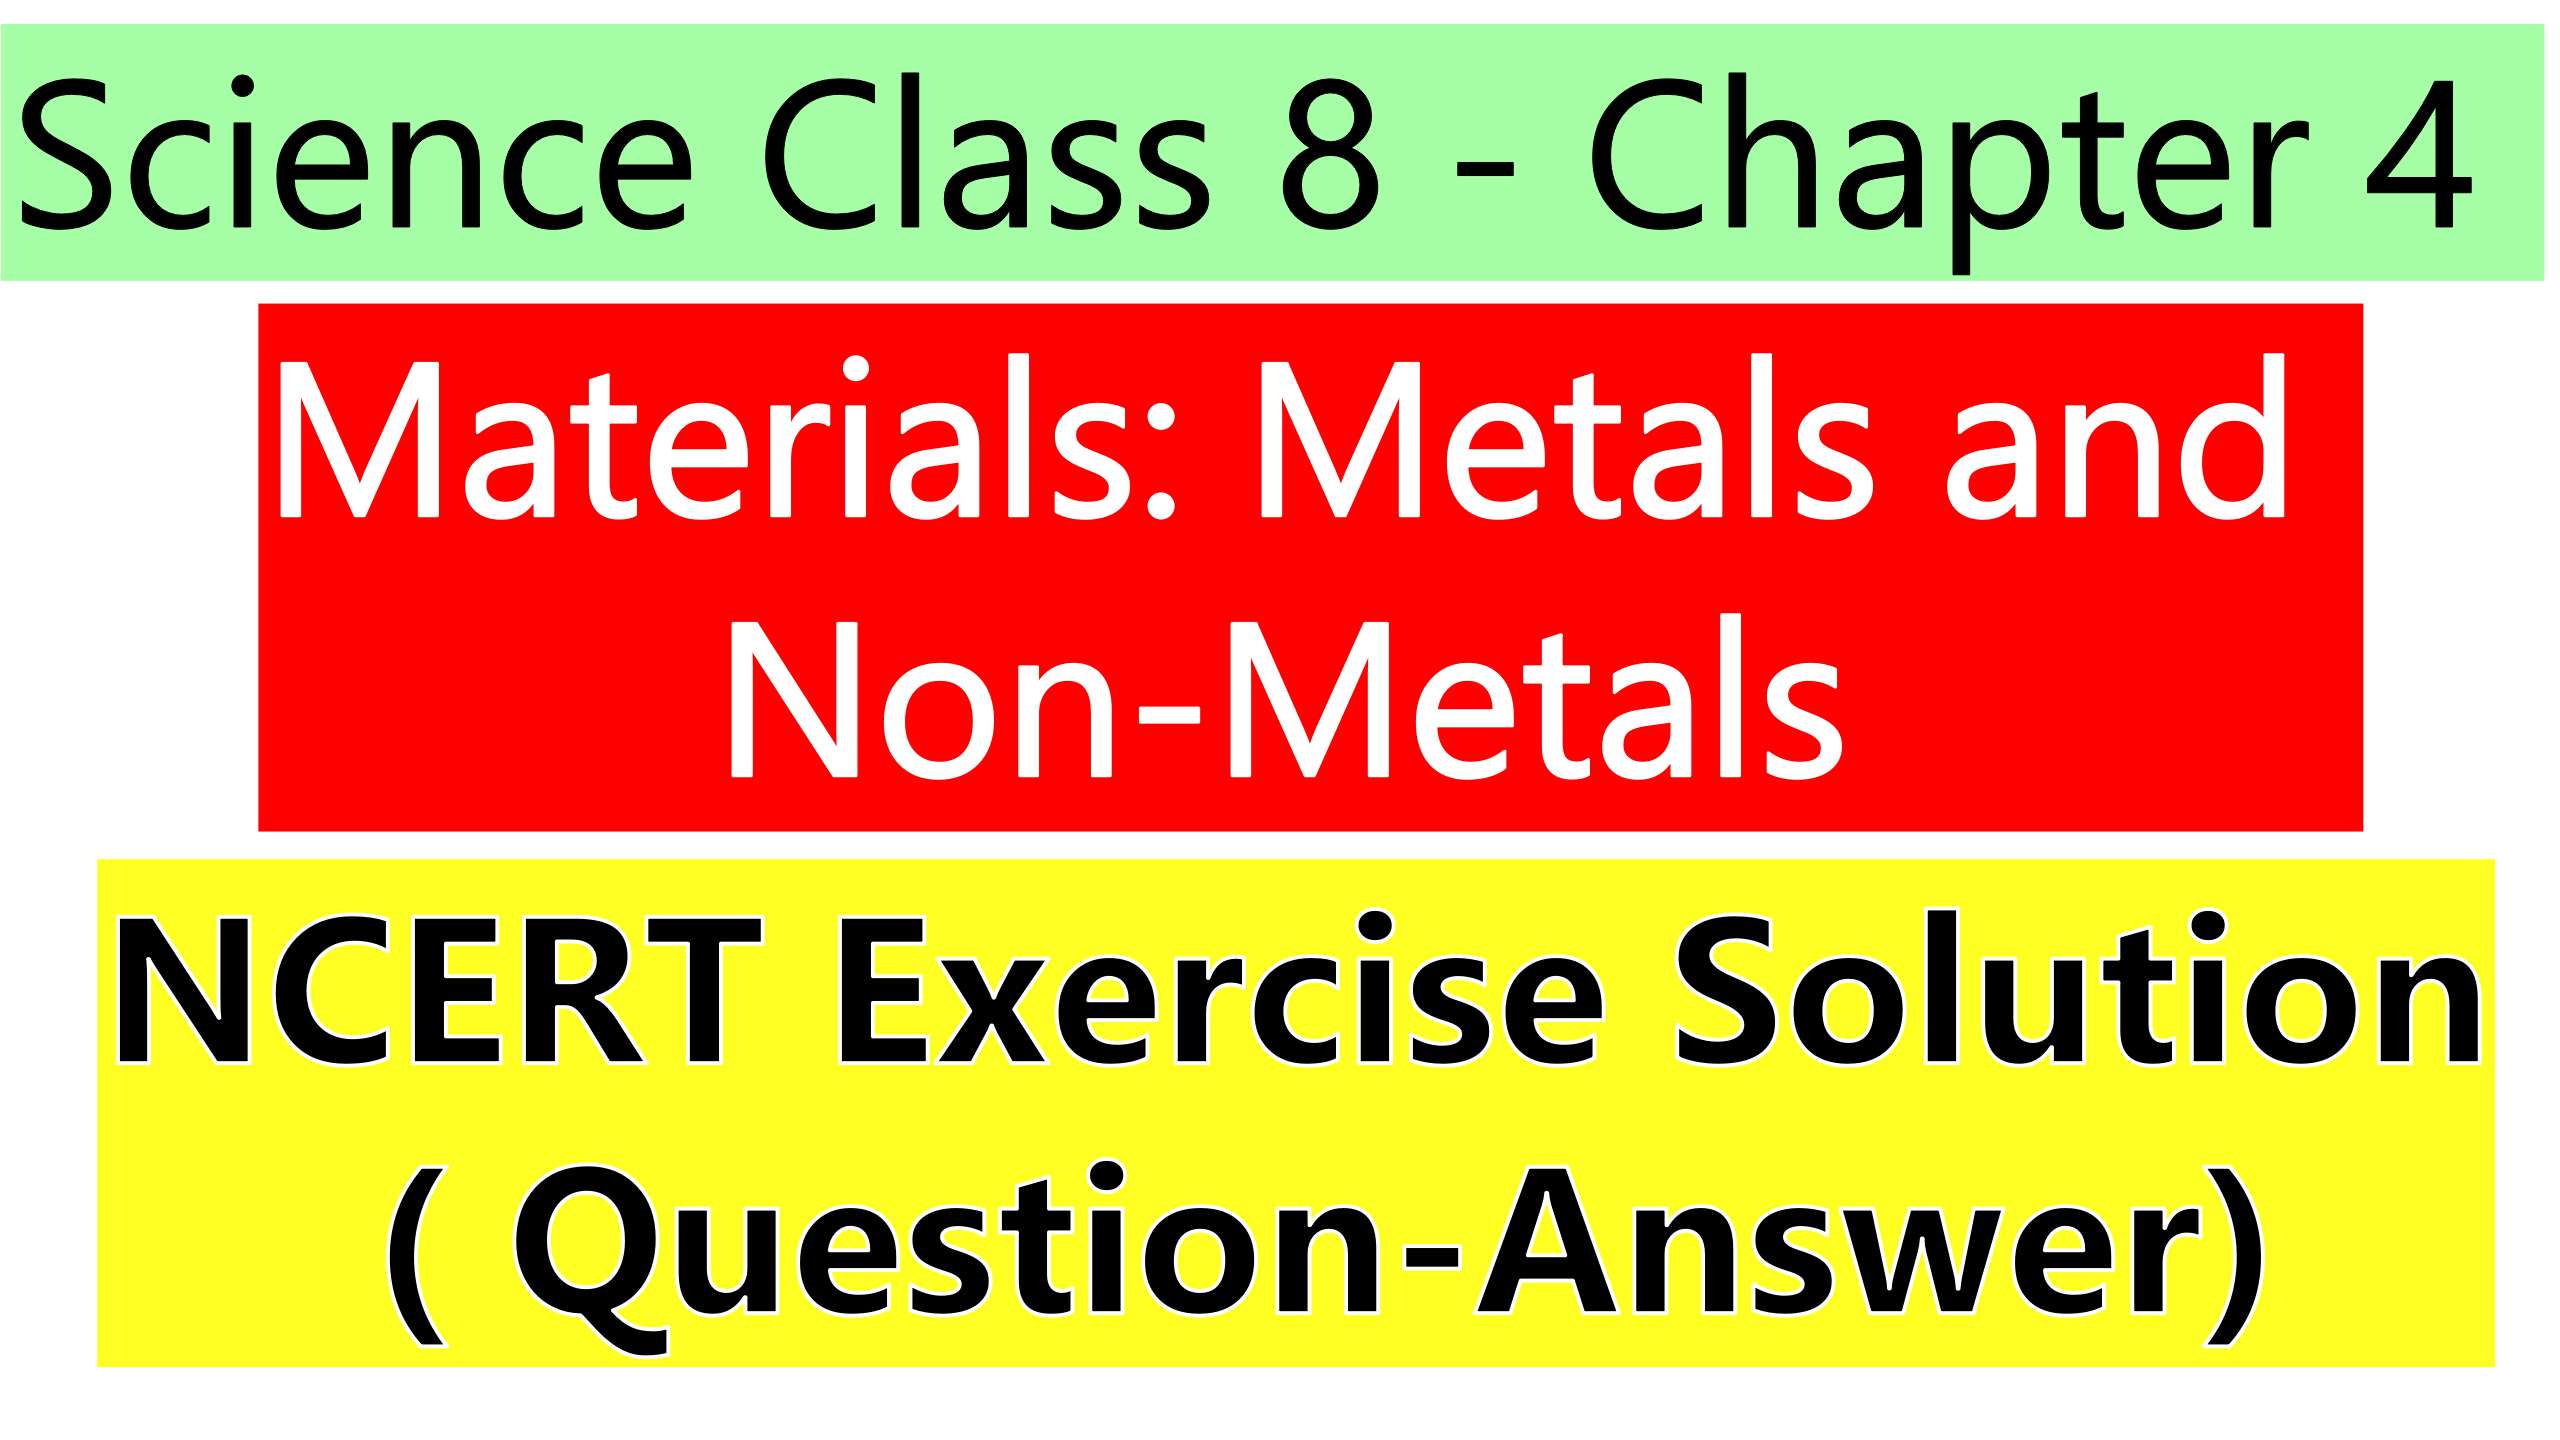 Science Class 8 - Chapter 4 - Materials Metals and Non-Metals - NCERT Exercise Solution ( Question-Answer)